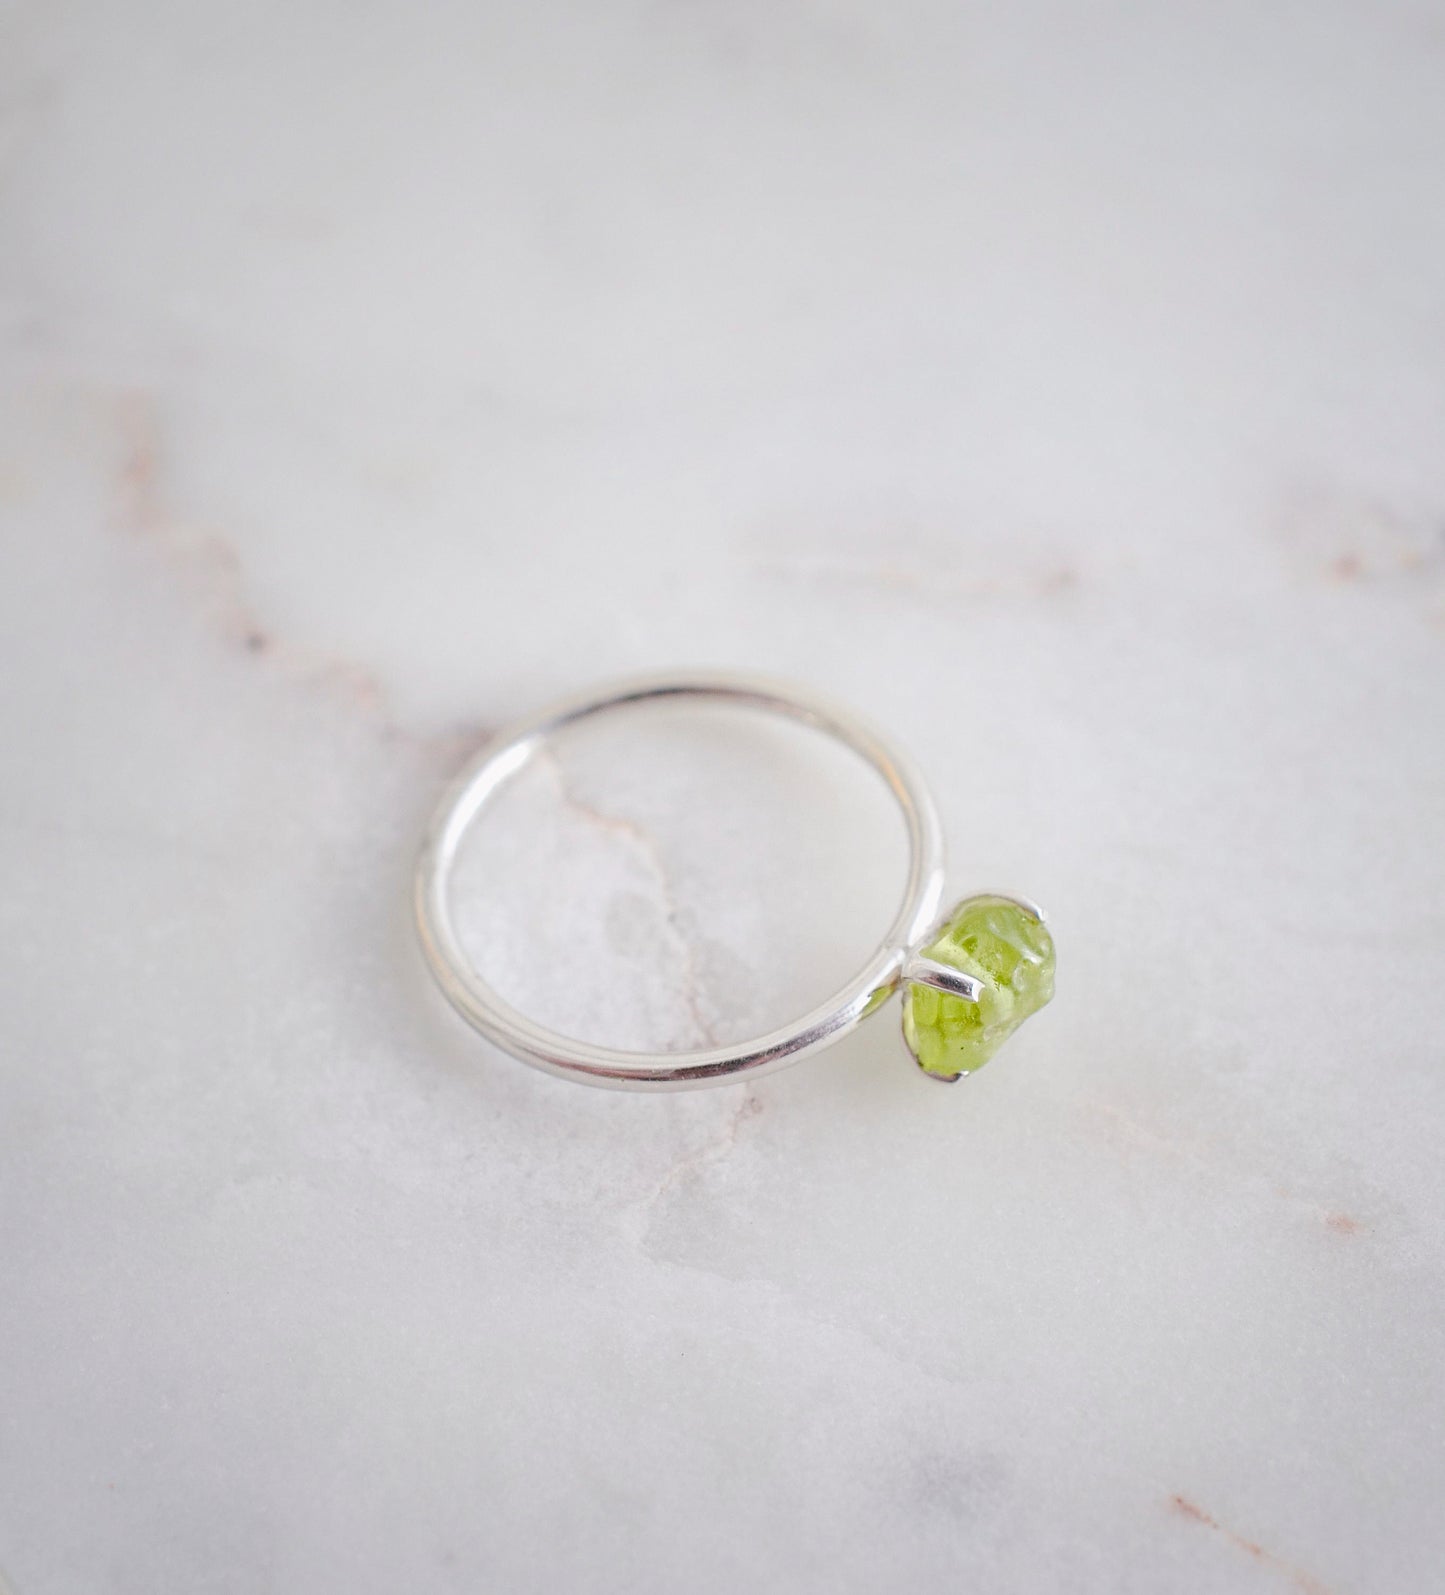 Rough green peridot ring on a sterling silver band. Close up image.